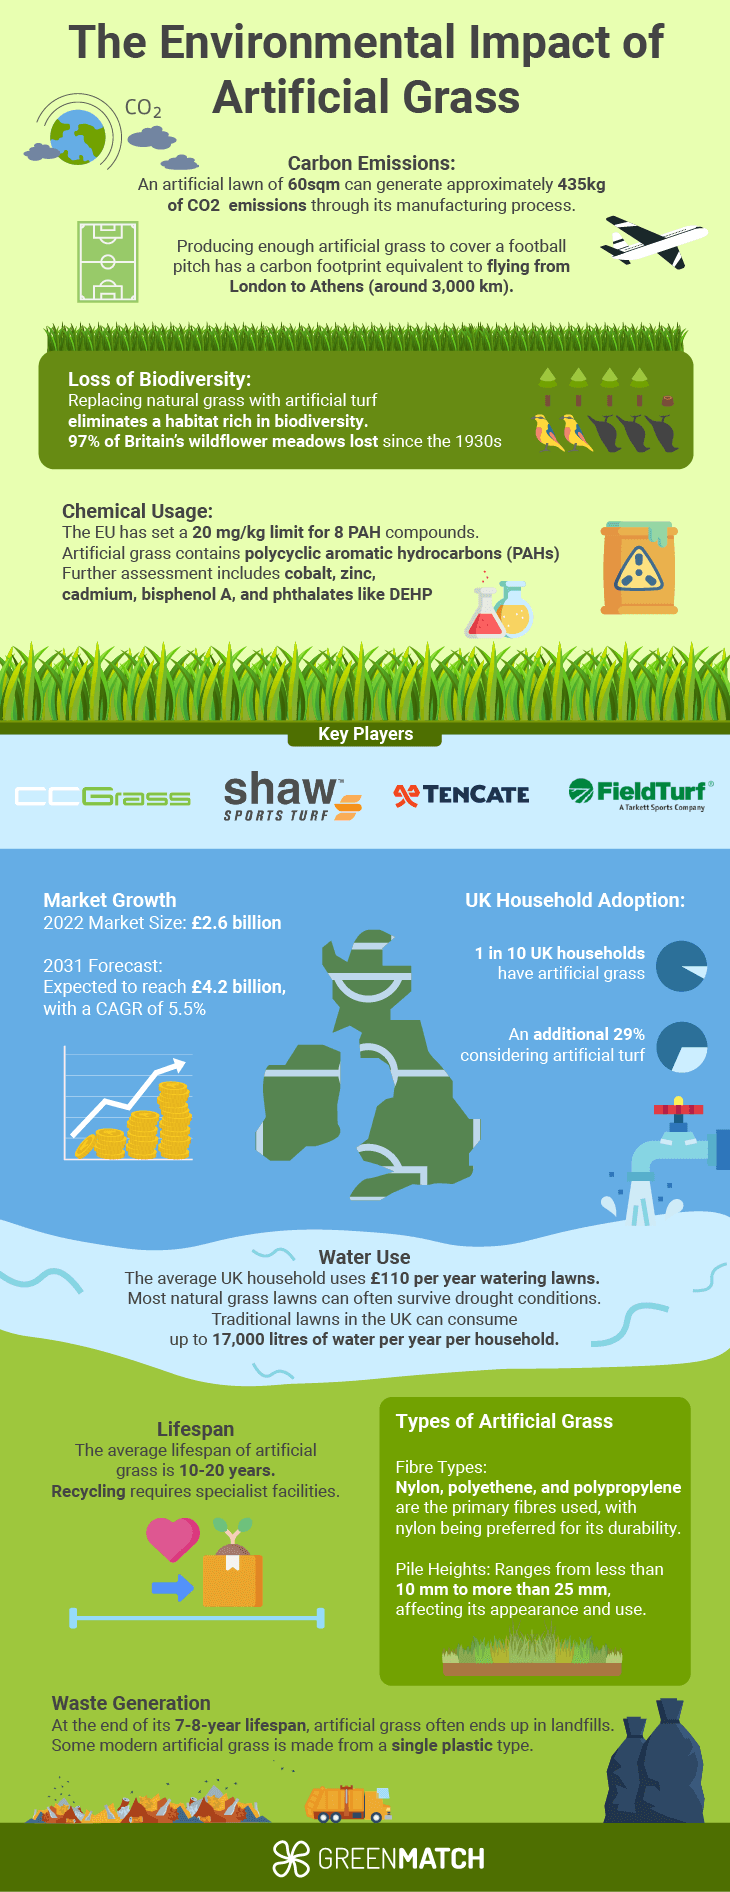 Infographic illustrating the environmental impact of artificial grass, highlighting increased soil carbon loss, reduced biodiversity, and higher local temperatures compared to natural grass areas.